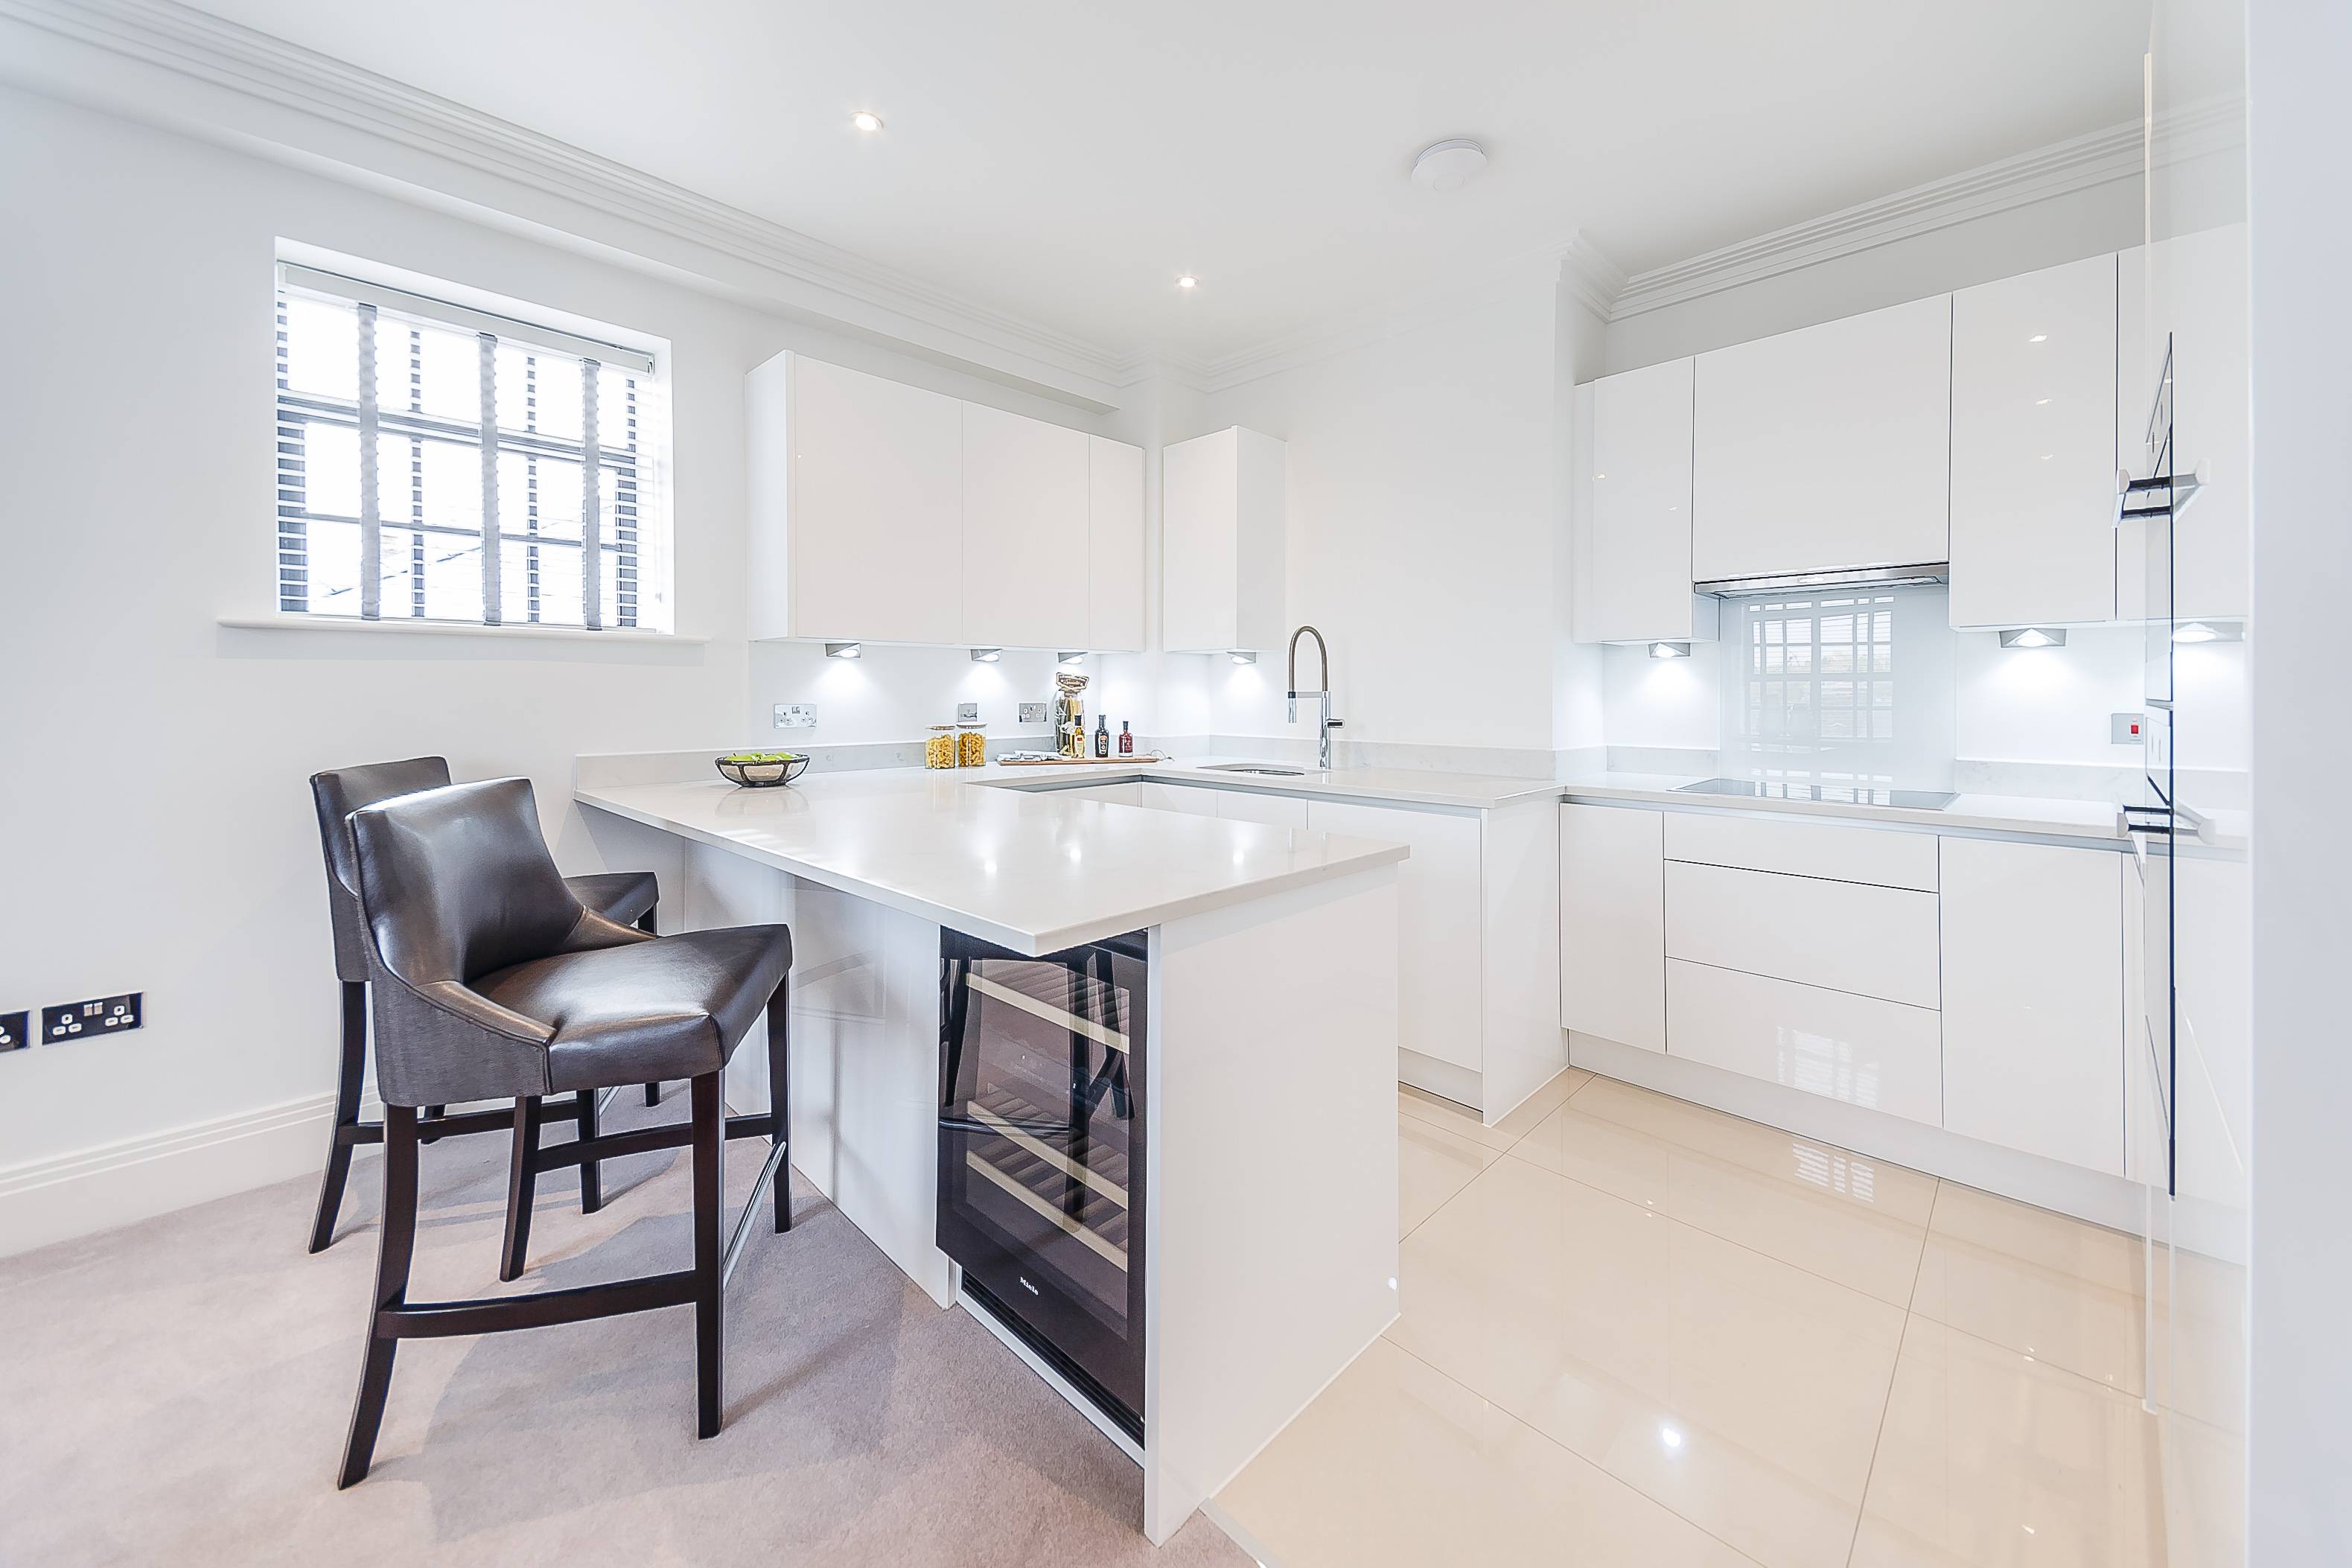 A stunning brand new interior designed two bedroom, two bathroom second floor apartment set within this newly converted, warehouse style, gated development on the River Thames.